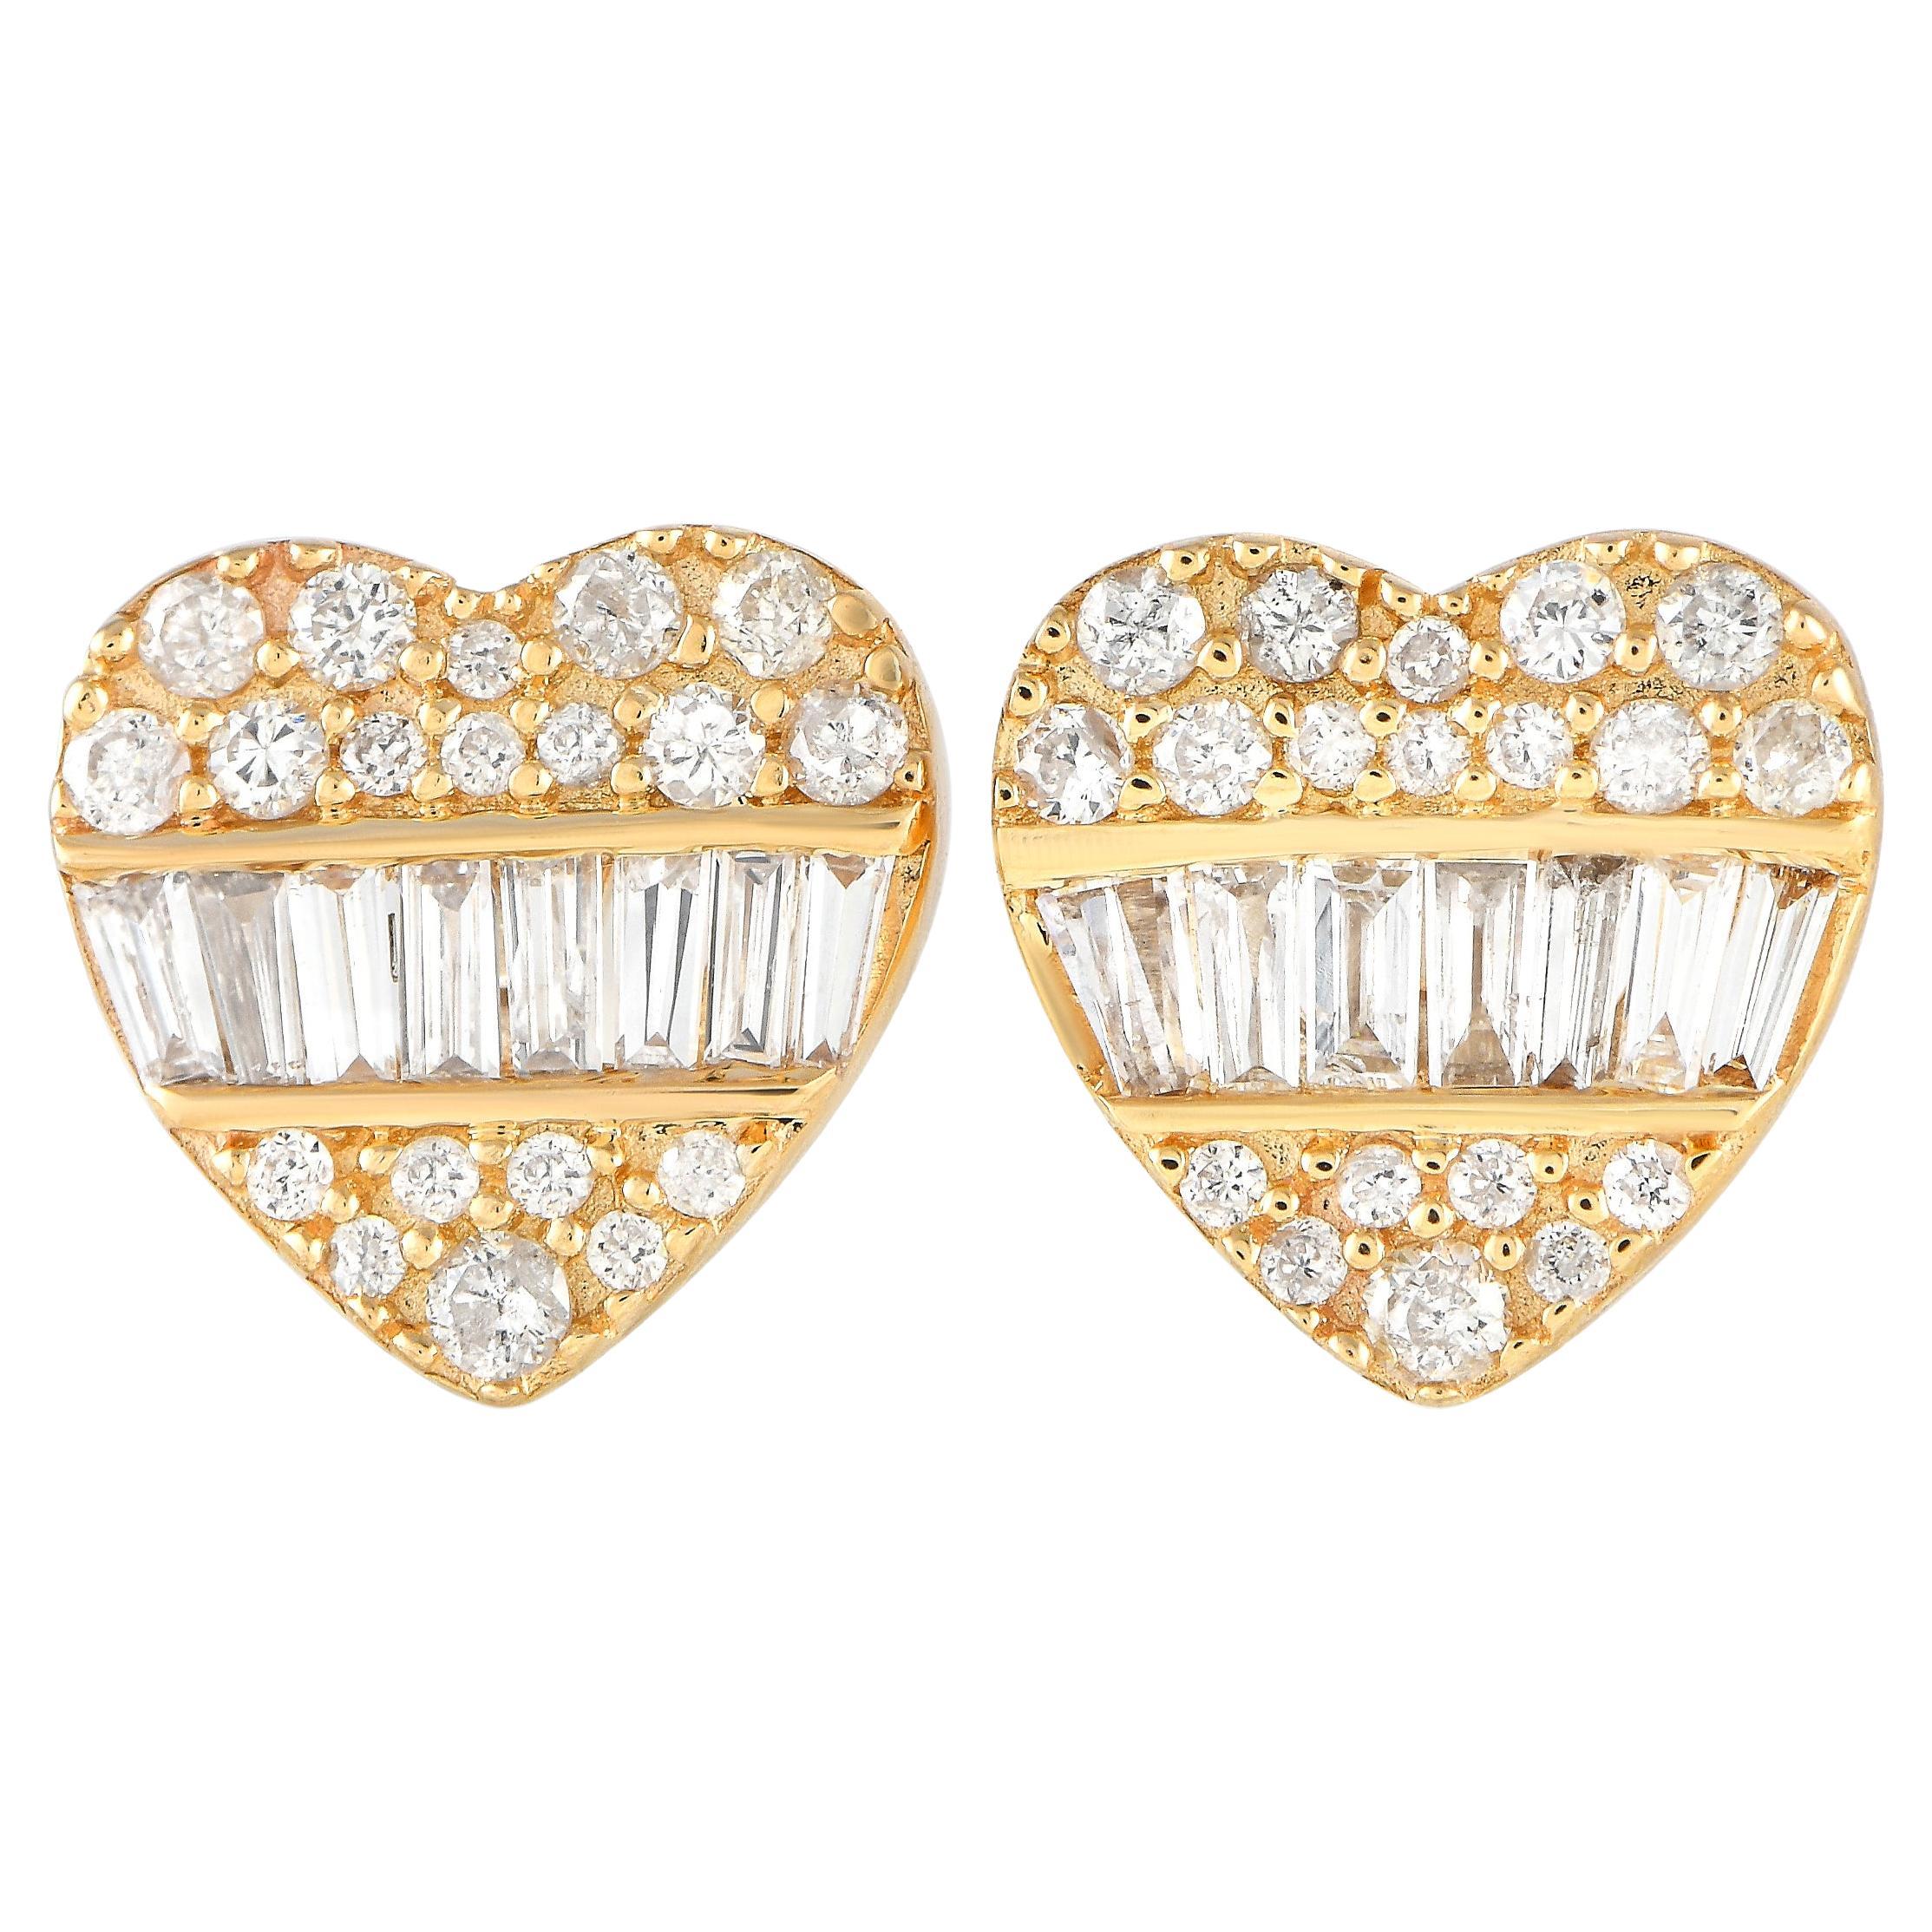 LB Exclusive 14K Yellow Gold 0.35ct Diamond Heart Earrings For Sale